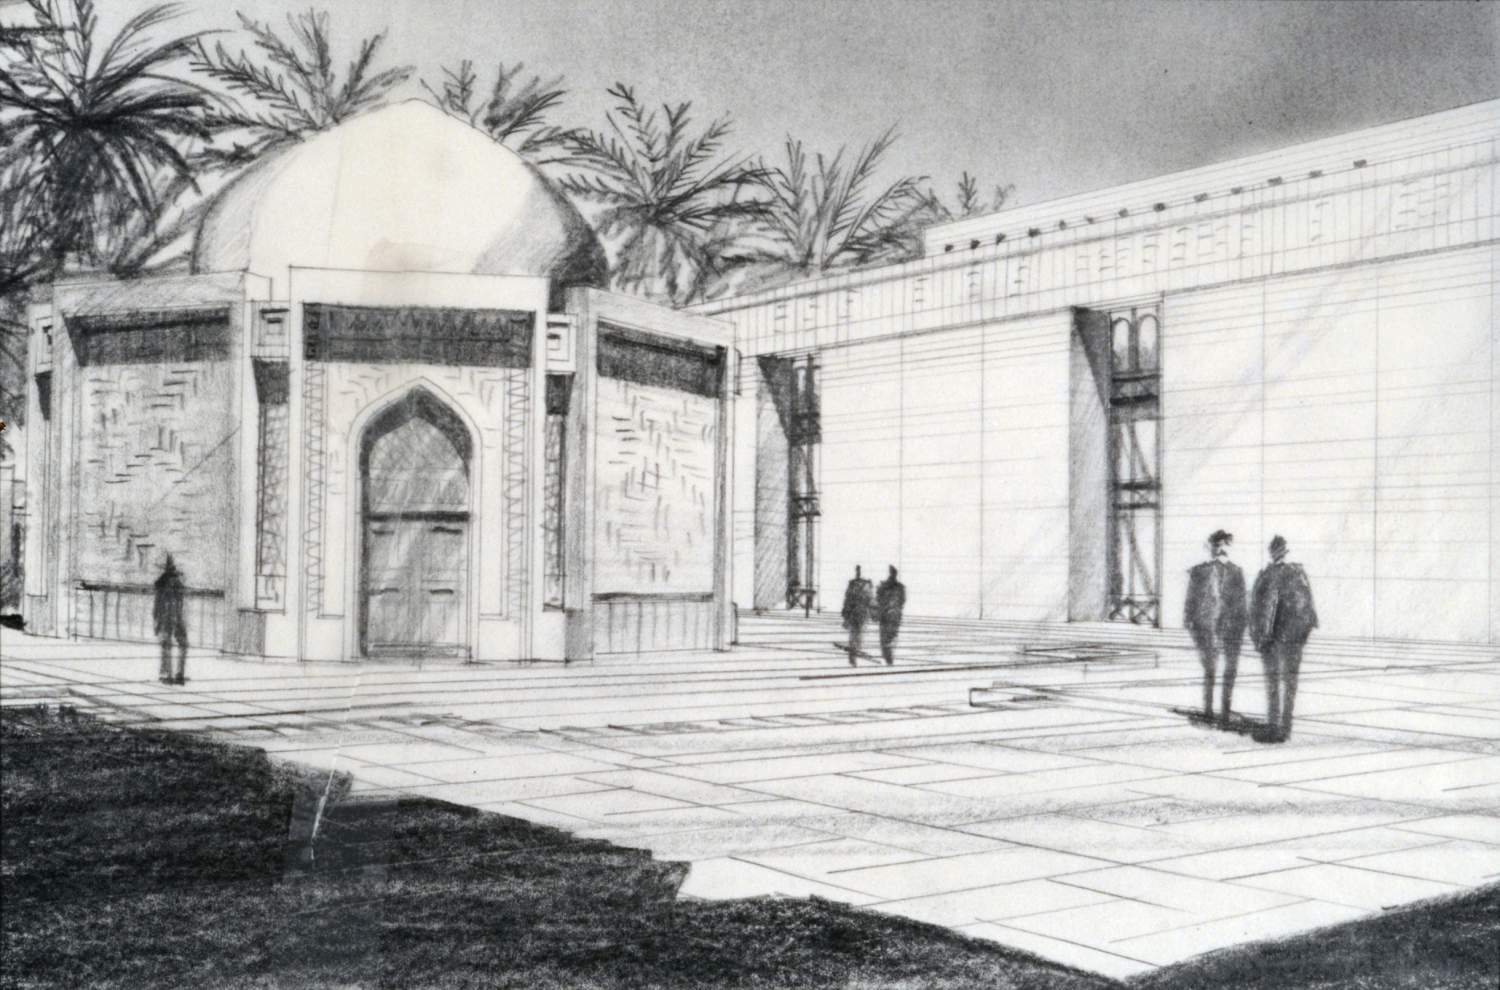 <p>Exterior perspective view of domed pavilion.</p>